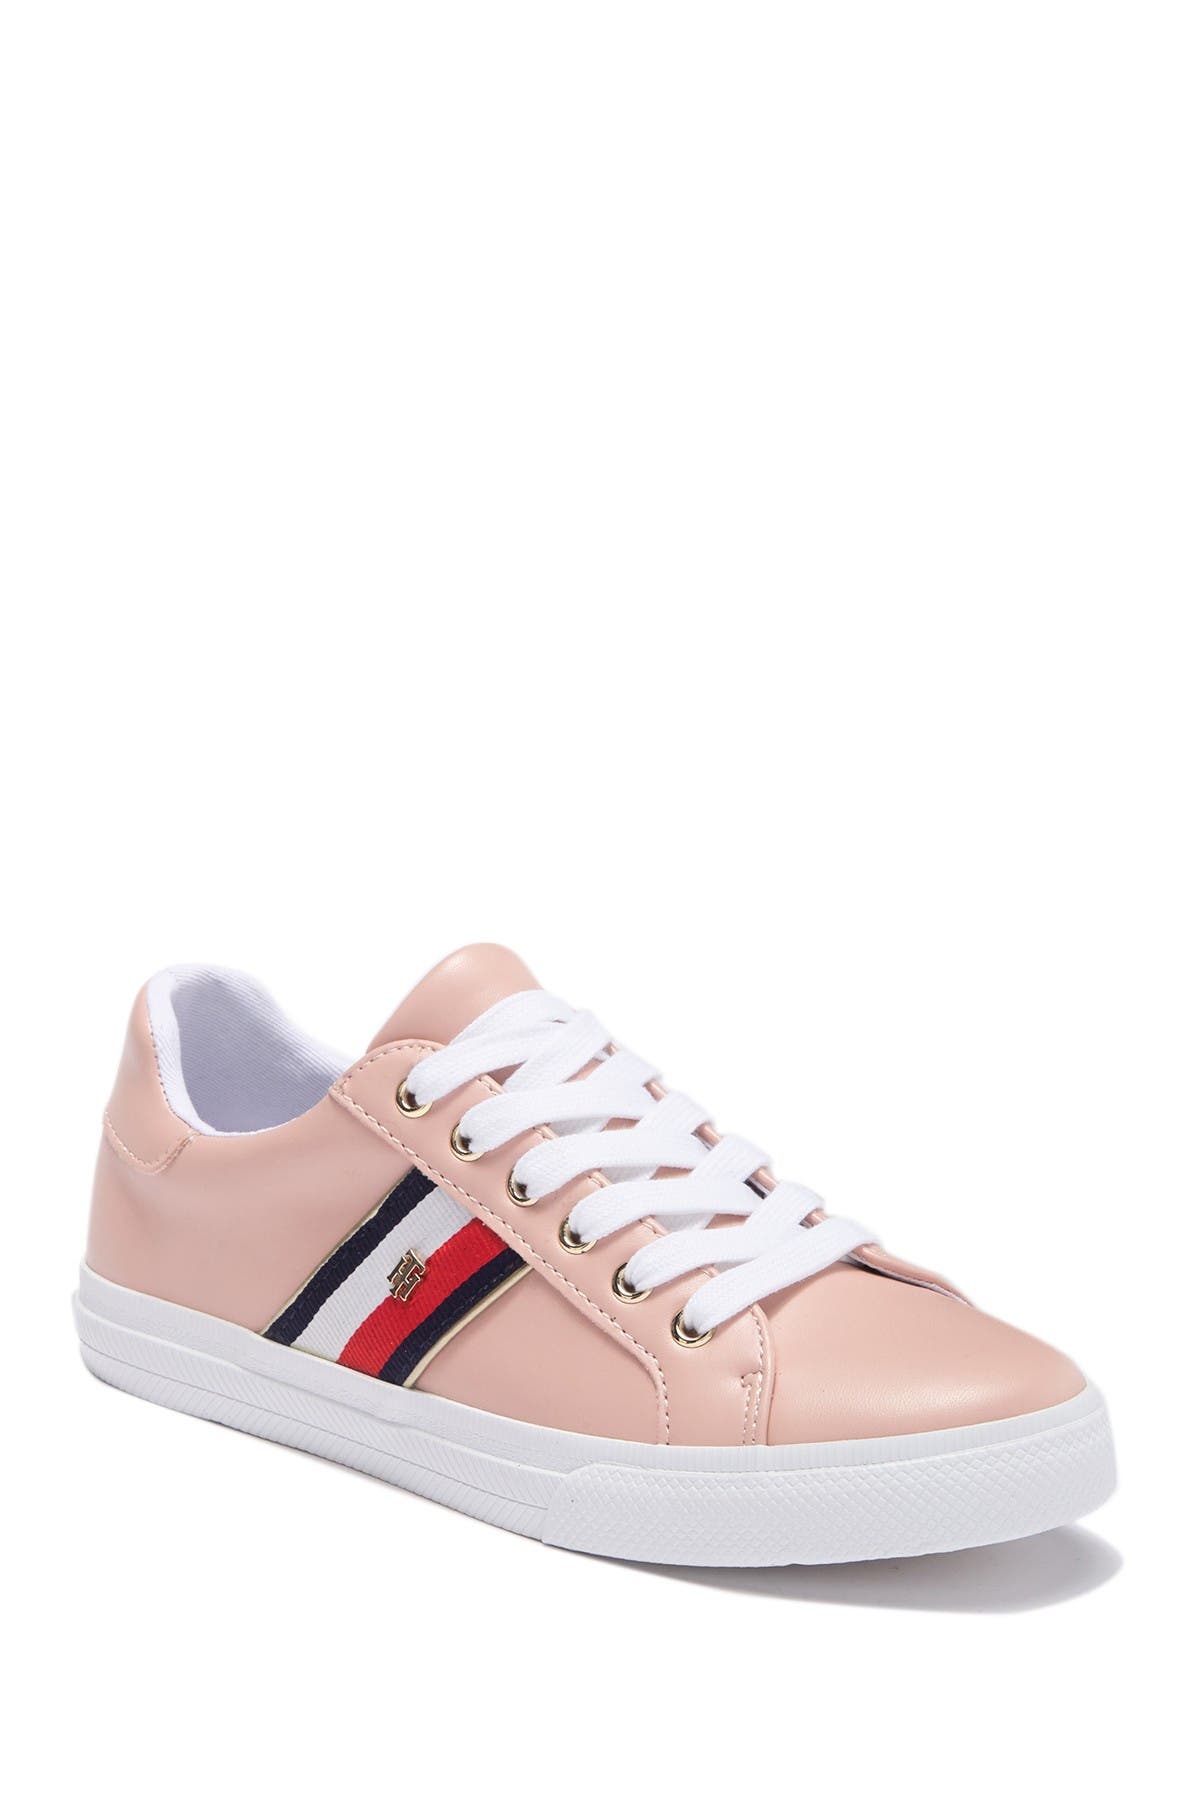 tommy hilfiger lace up sneakers